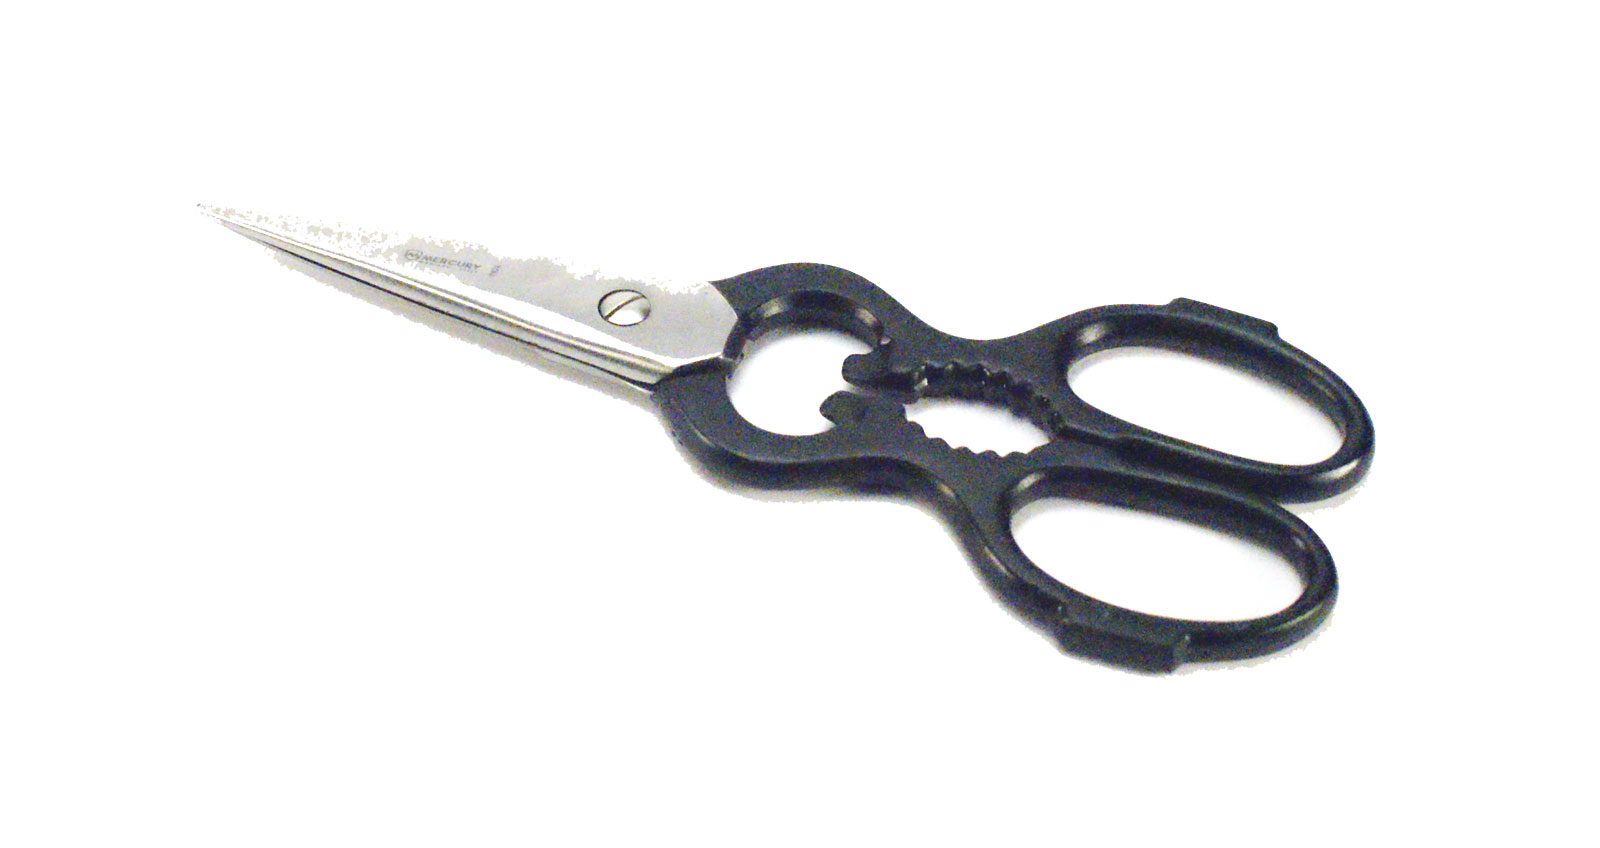 Spare Parts for Stainless Steel Kitchen Scissors